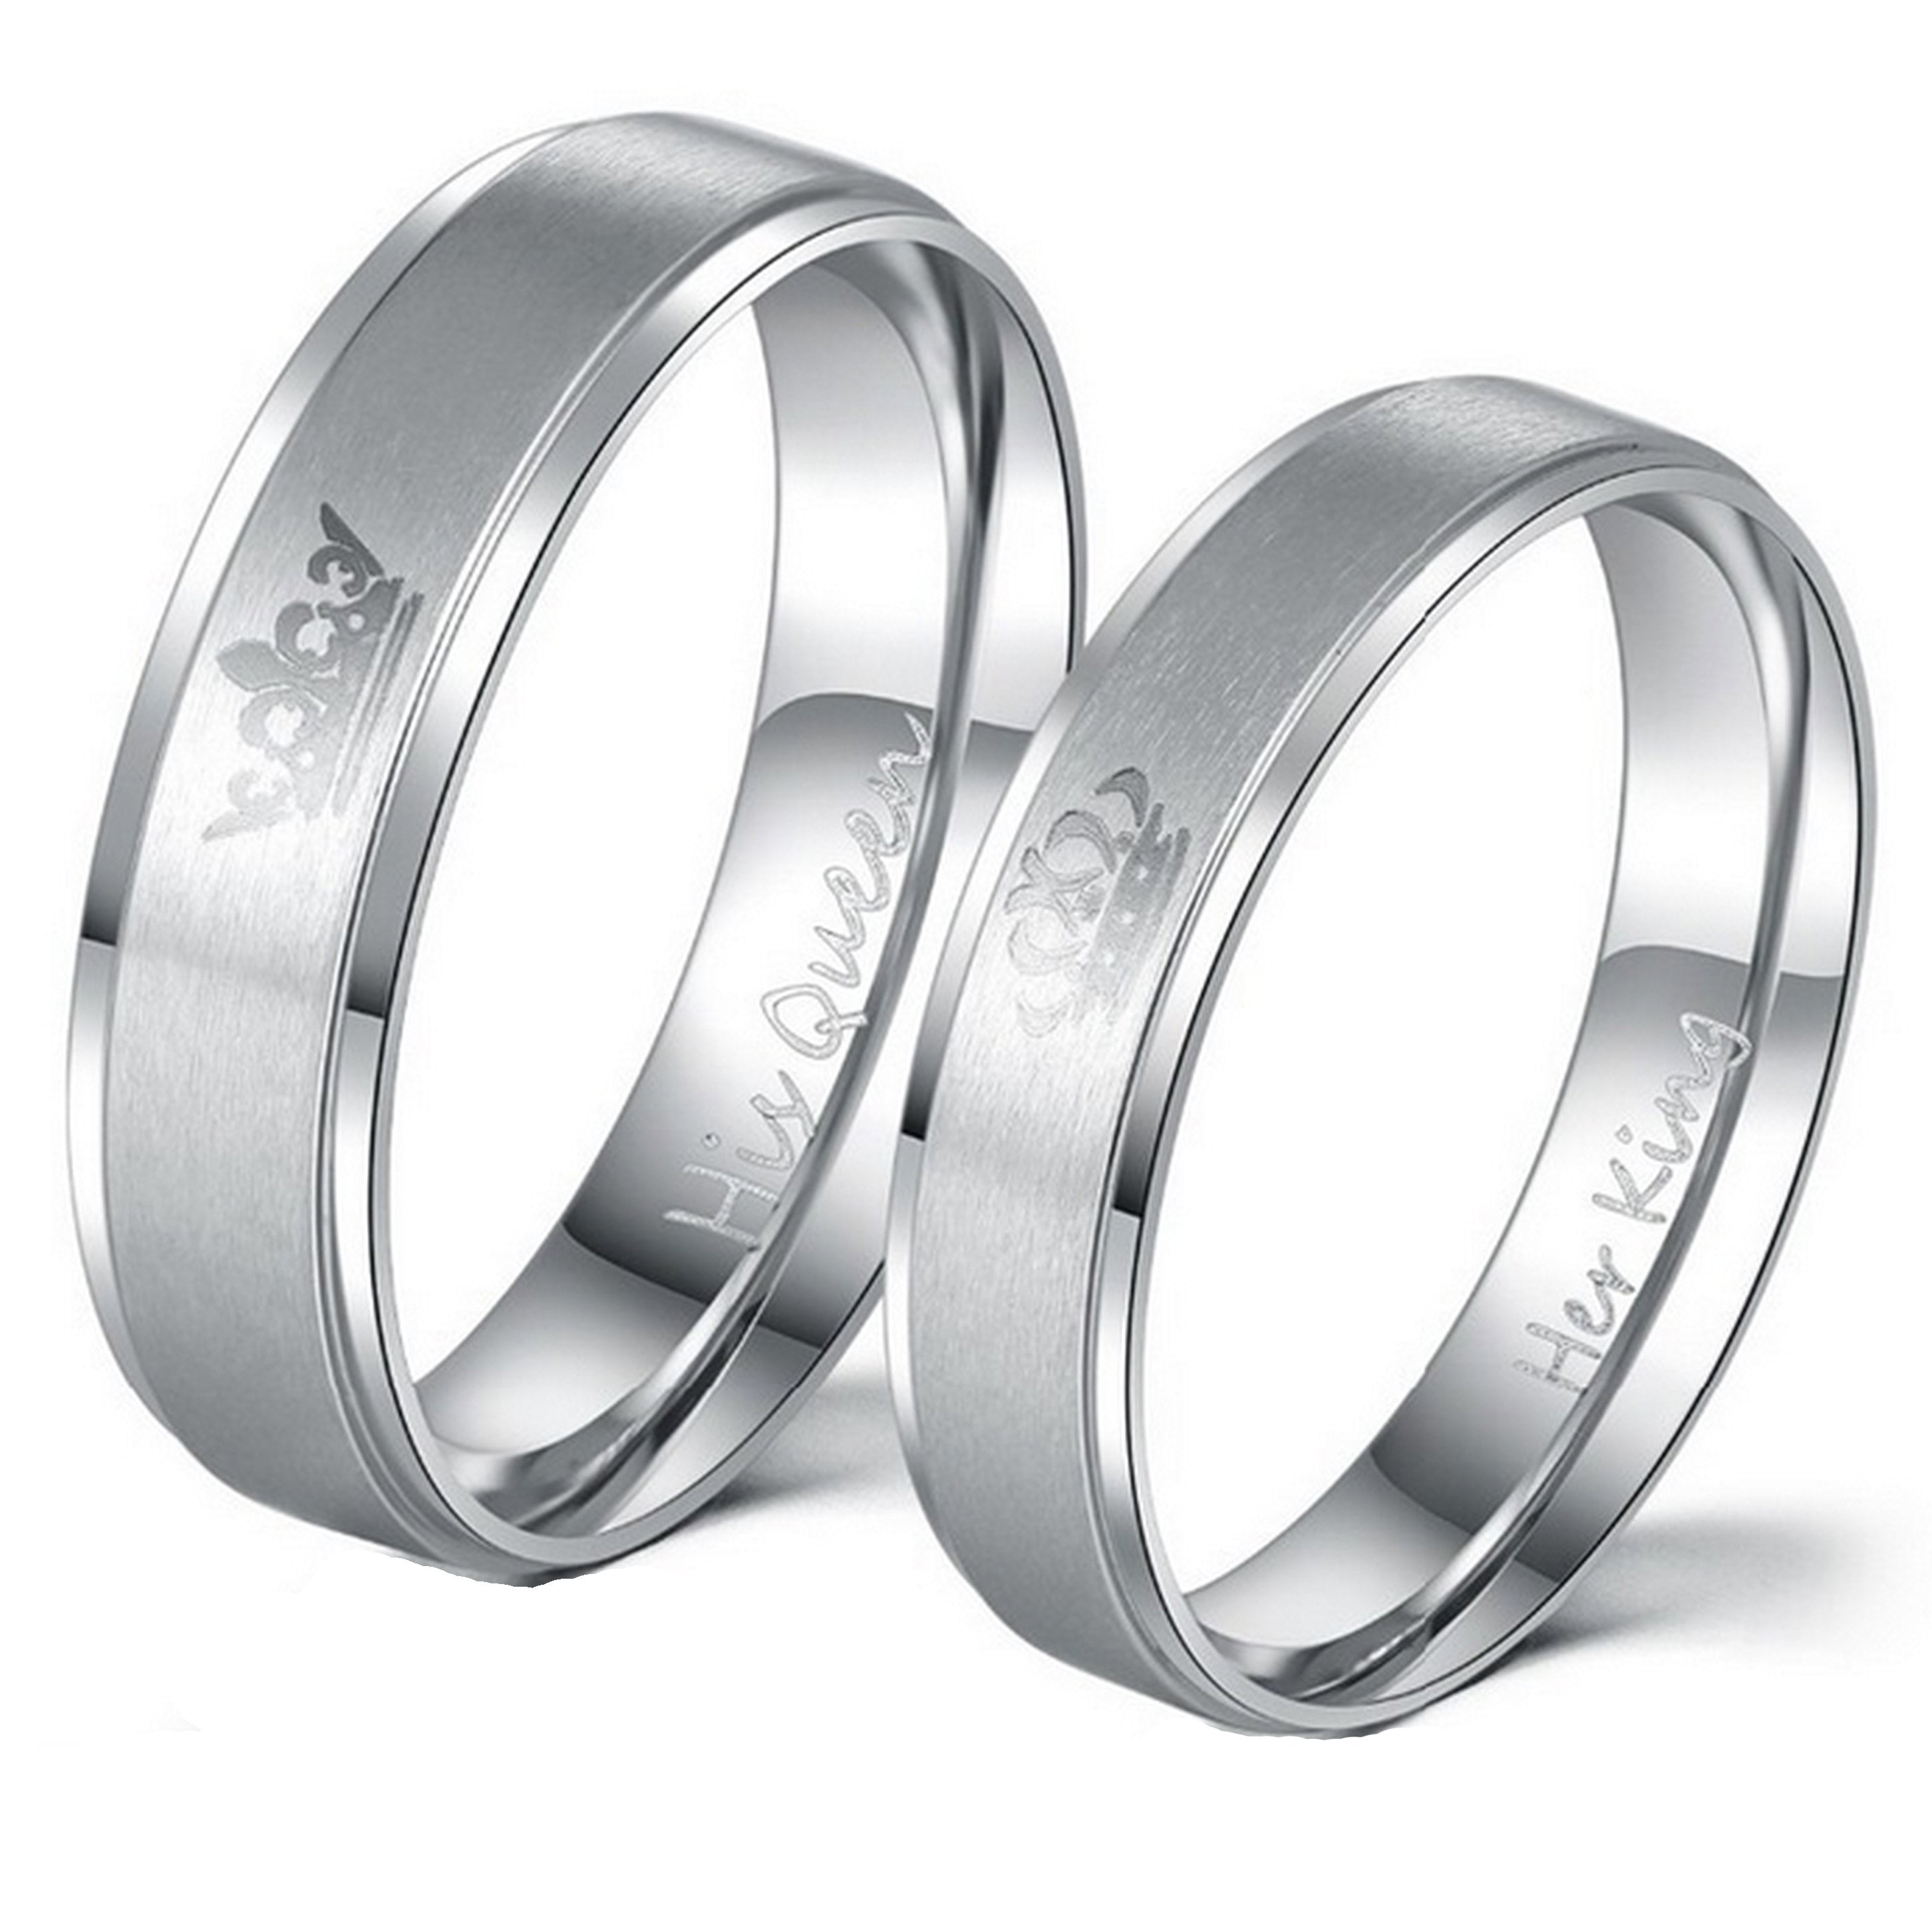 King and Queen Couple Ring Stainless Steel Wedding Engagement Band for Men Women 